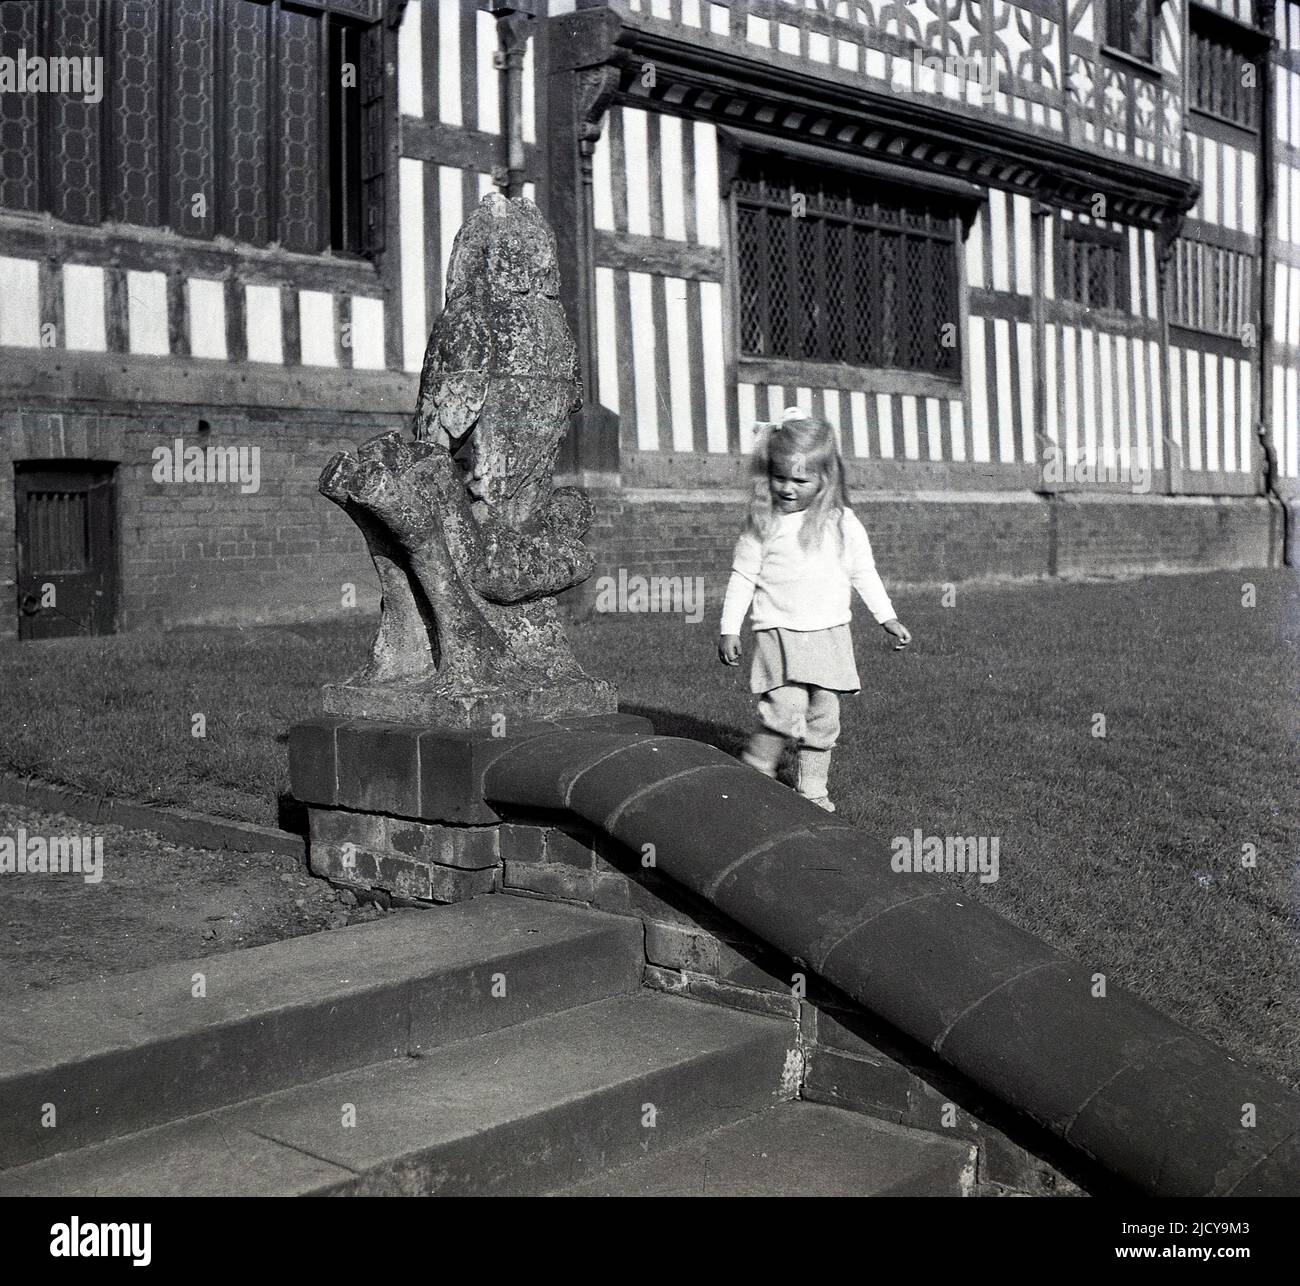 1940s, historical, a little girl by the steps outside the front of Bramall Hall, Bramhall, Stockport, England, UK. A timber-framed Tudor manor house that dates back to the 14th century, with later additions, the house and surrounding parkland was acquired by the local authority in 1935 and became a museum. The Davenport family, which it is believed built the house, held the manor for over 500 years. Stock Photo